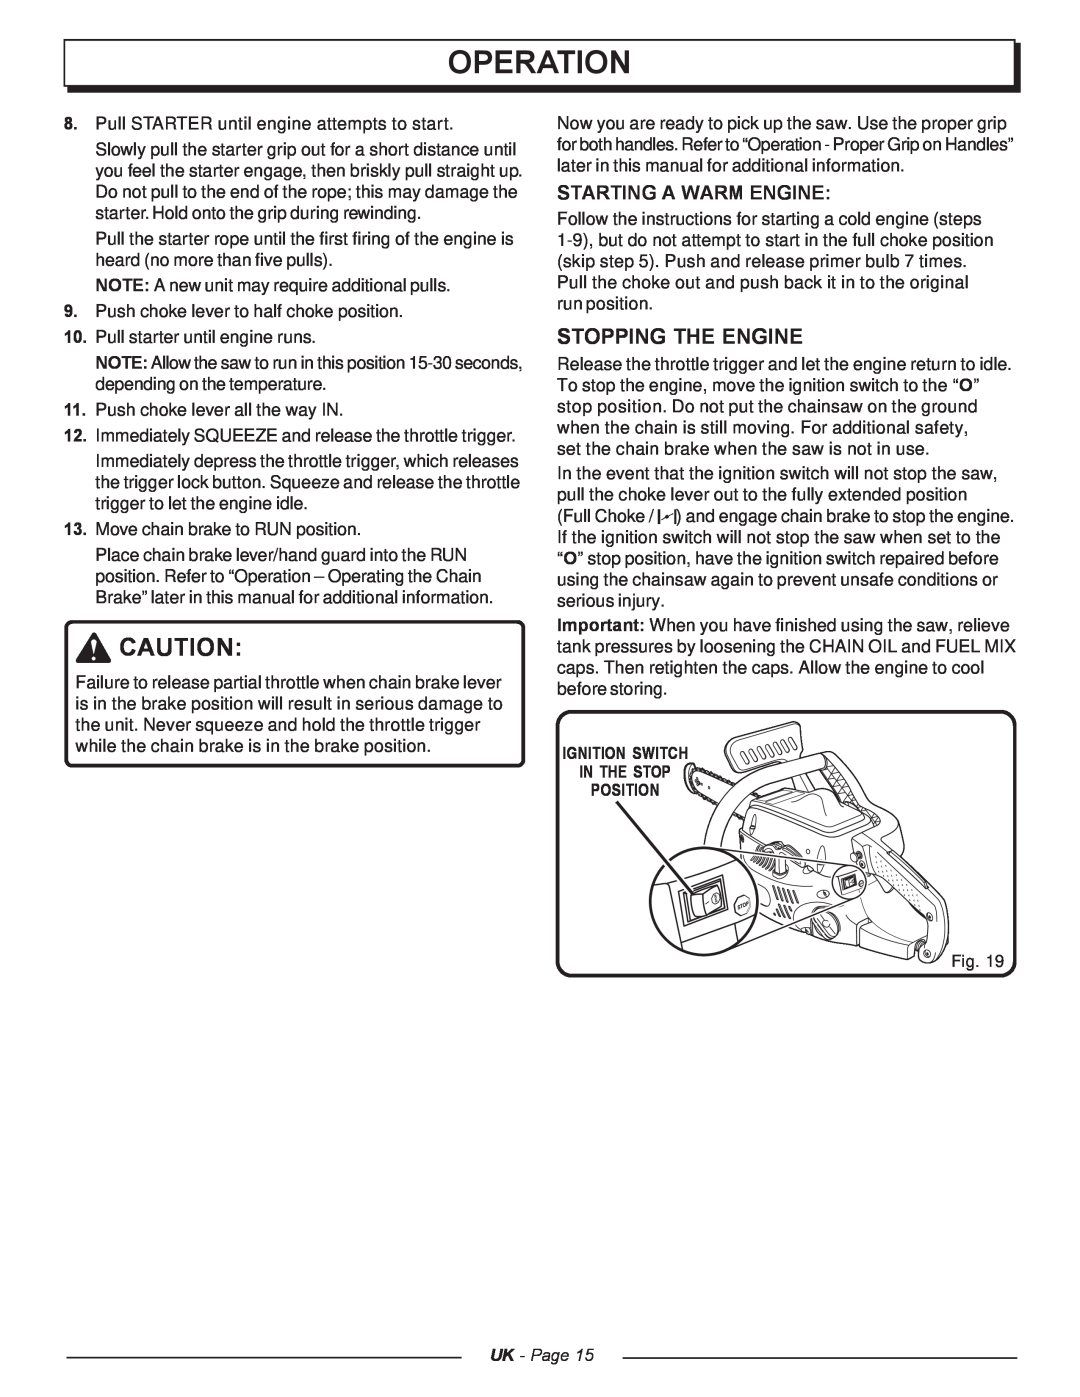 Homelite UT74121A manual Stopping The Engine, Starting A Warm Engine, Operation, UK - Page 